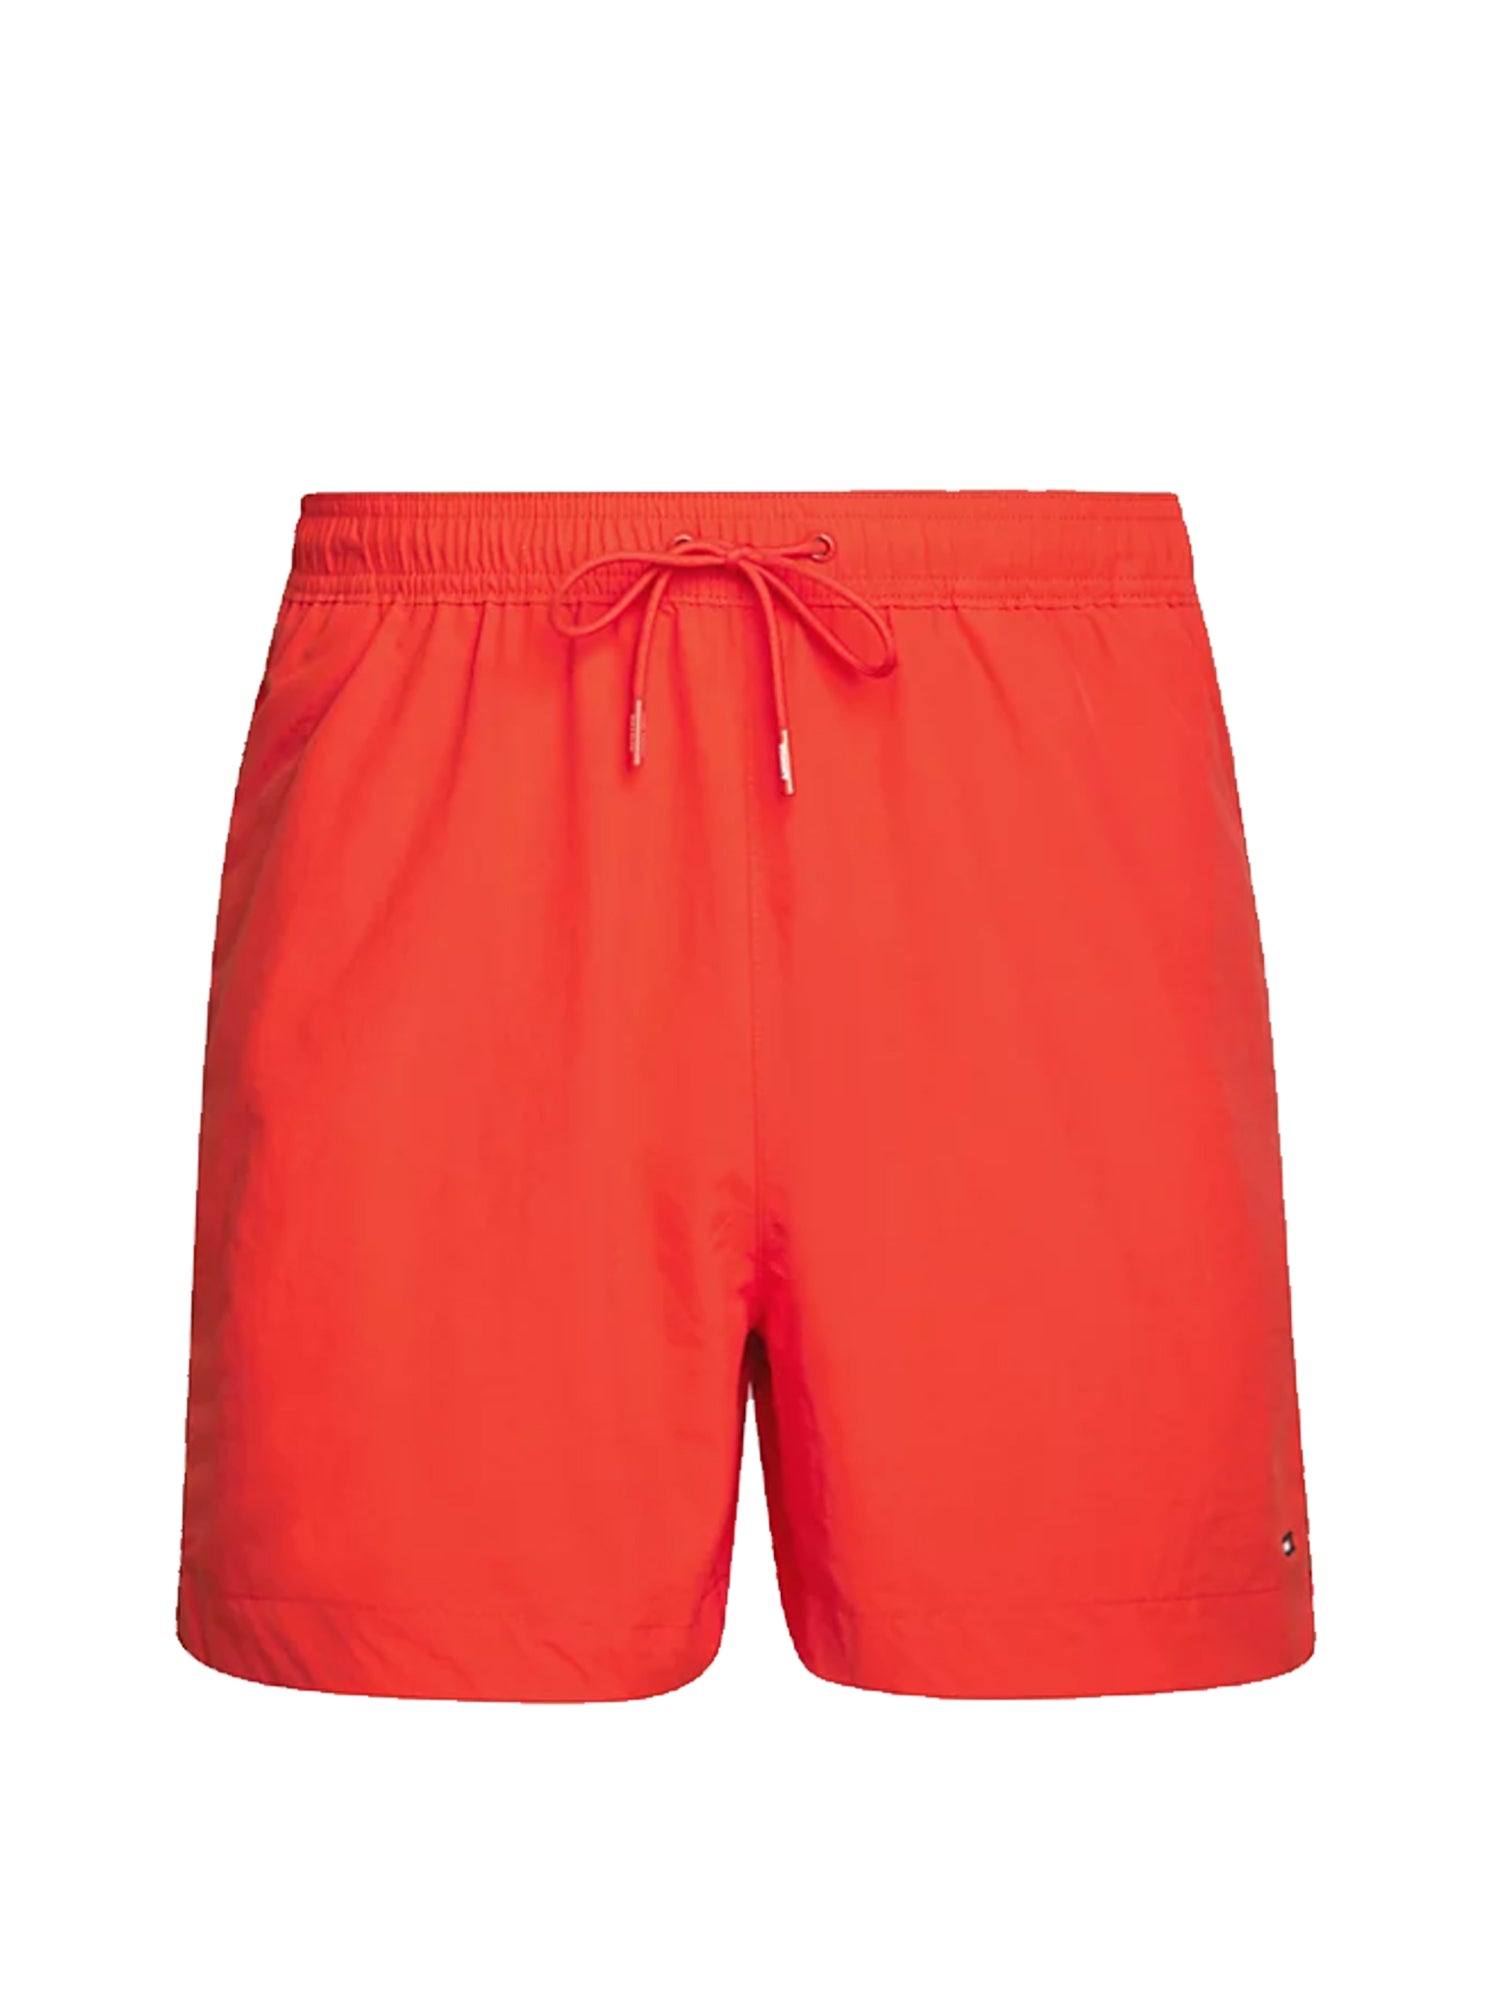 TOMMY HILFIGER COSTUME SHORTS ESSENTIAL MEDIO ROSSO